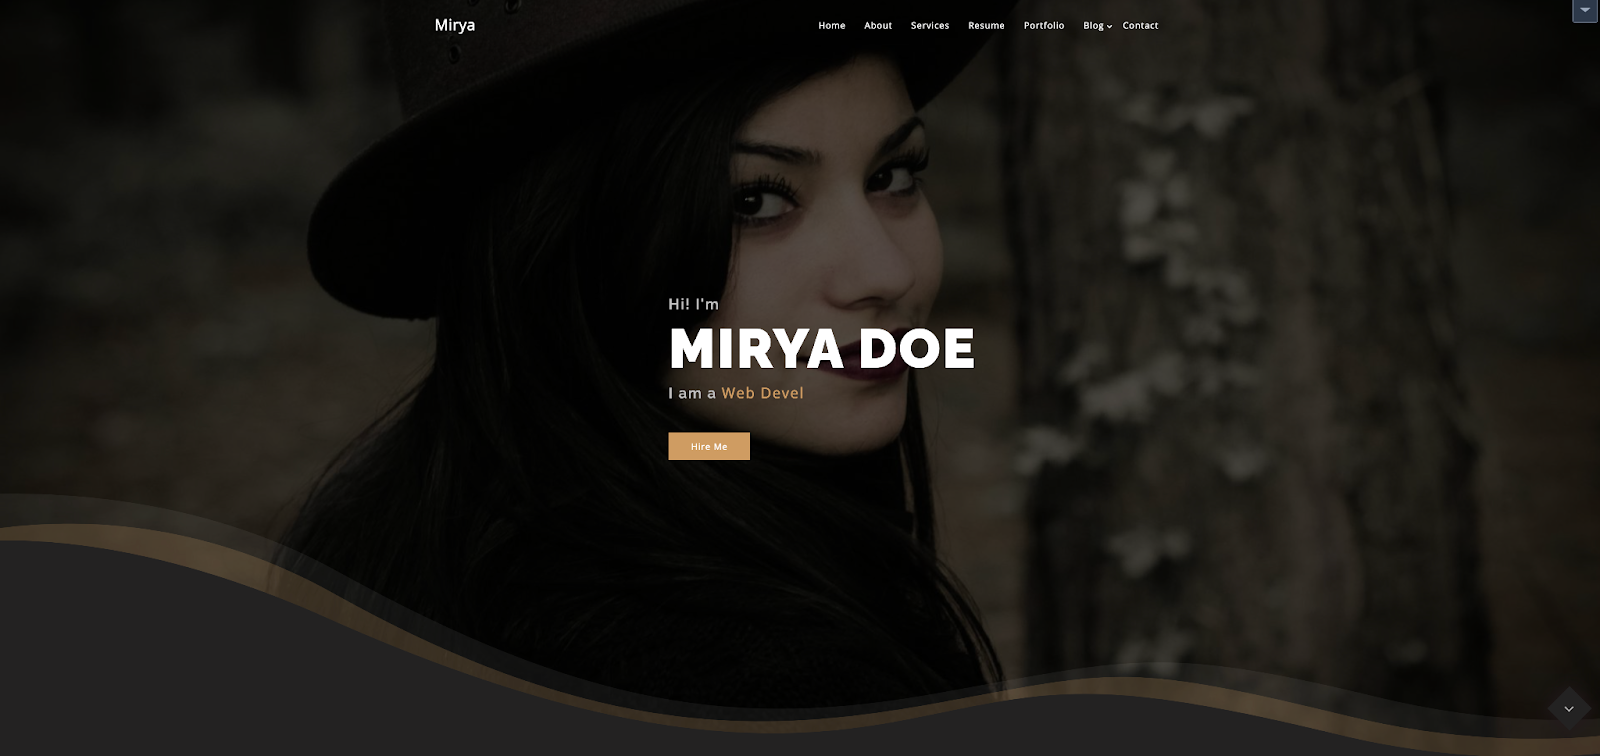 Mirya is a personal portfolio theme for WordPress, but you can also use it to build a blog or business website